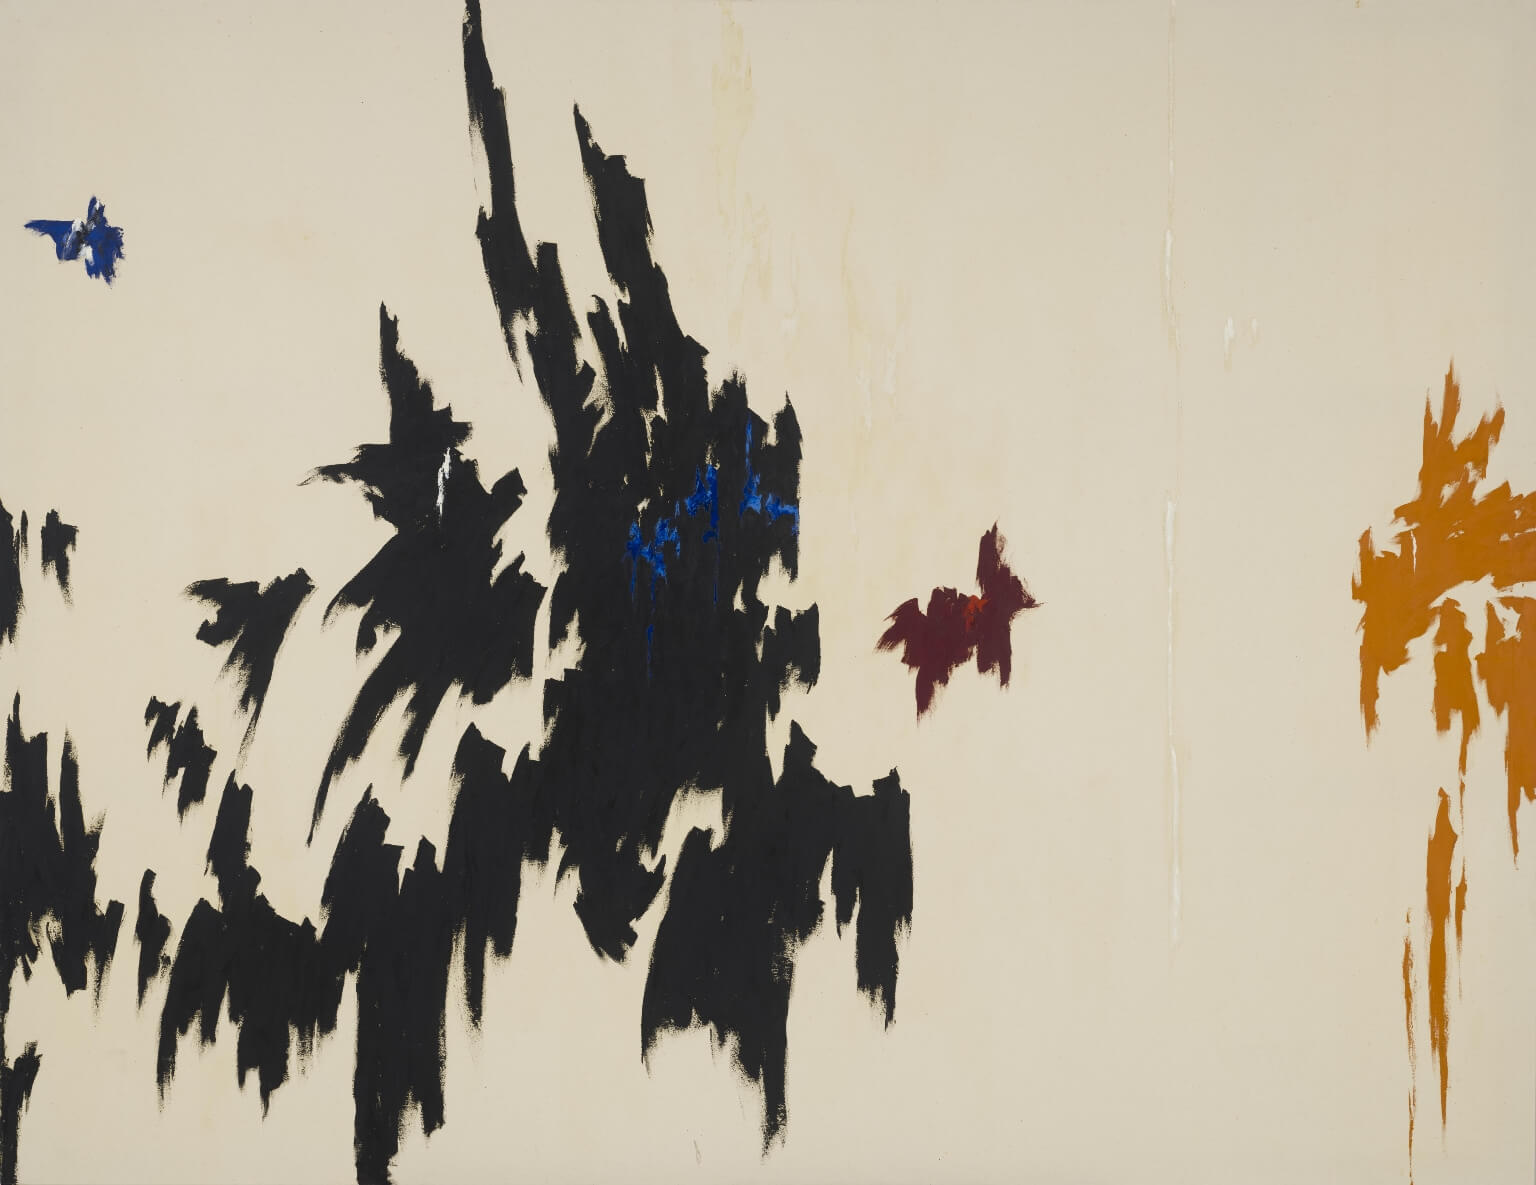 Abstract painting with bare canvas, a large black explosion of jagged paint on the left side, a smaller explosion of yellow gold on the other side, and highlights of blue, red, and white